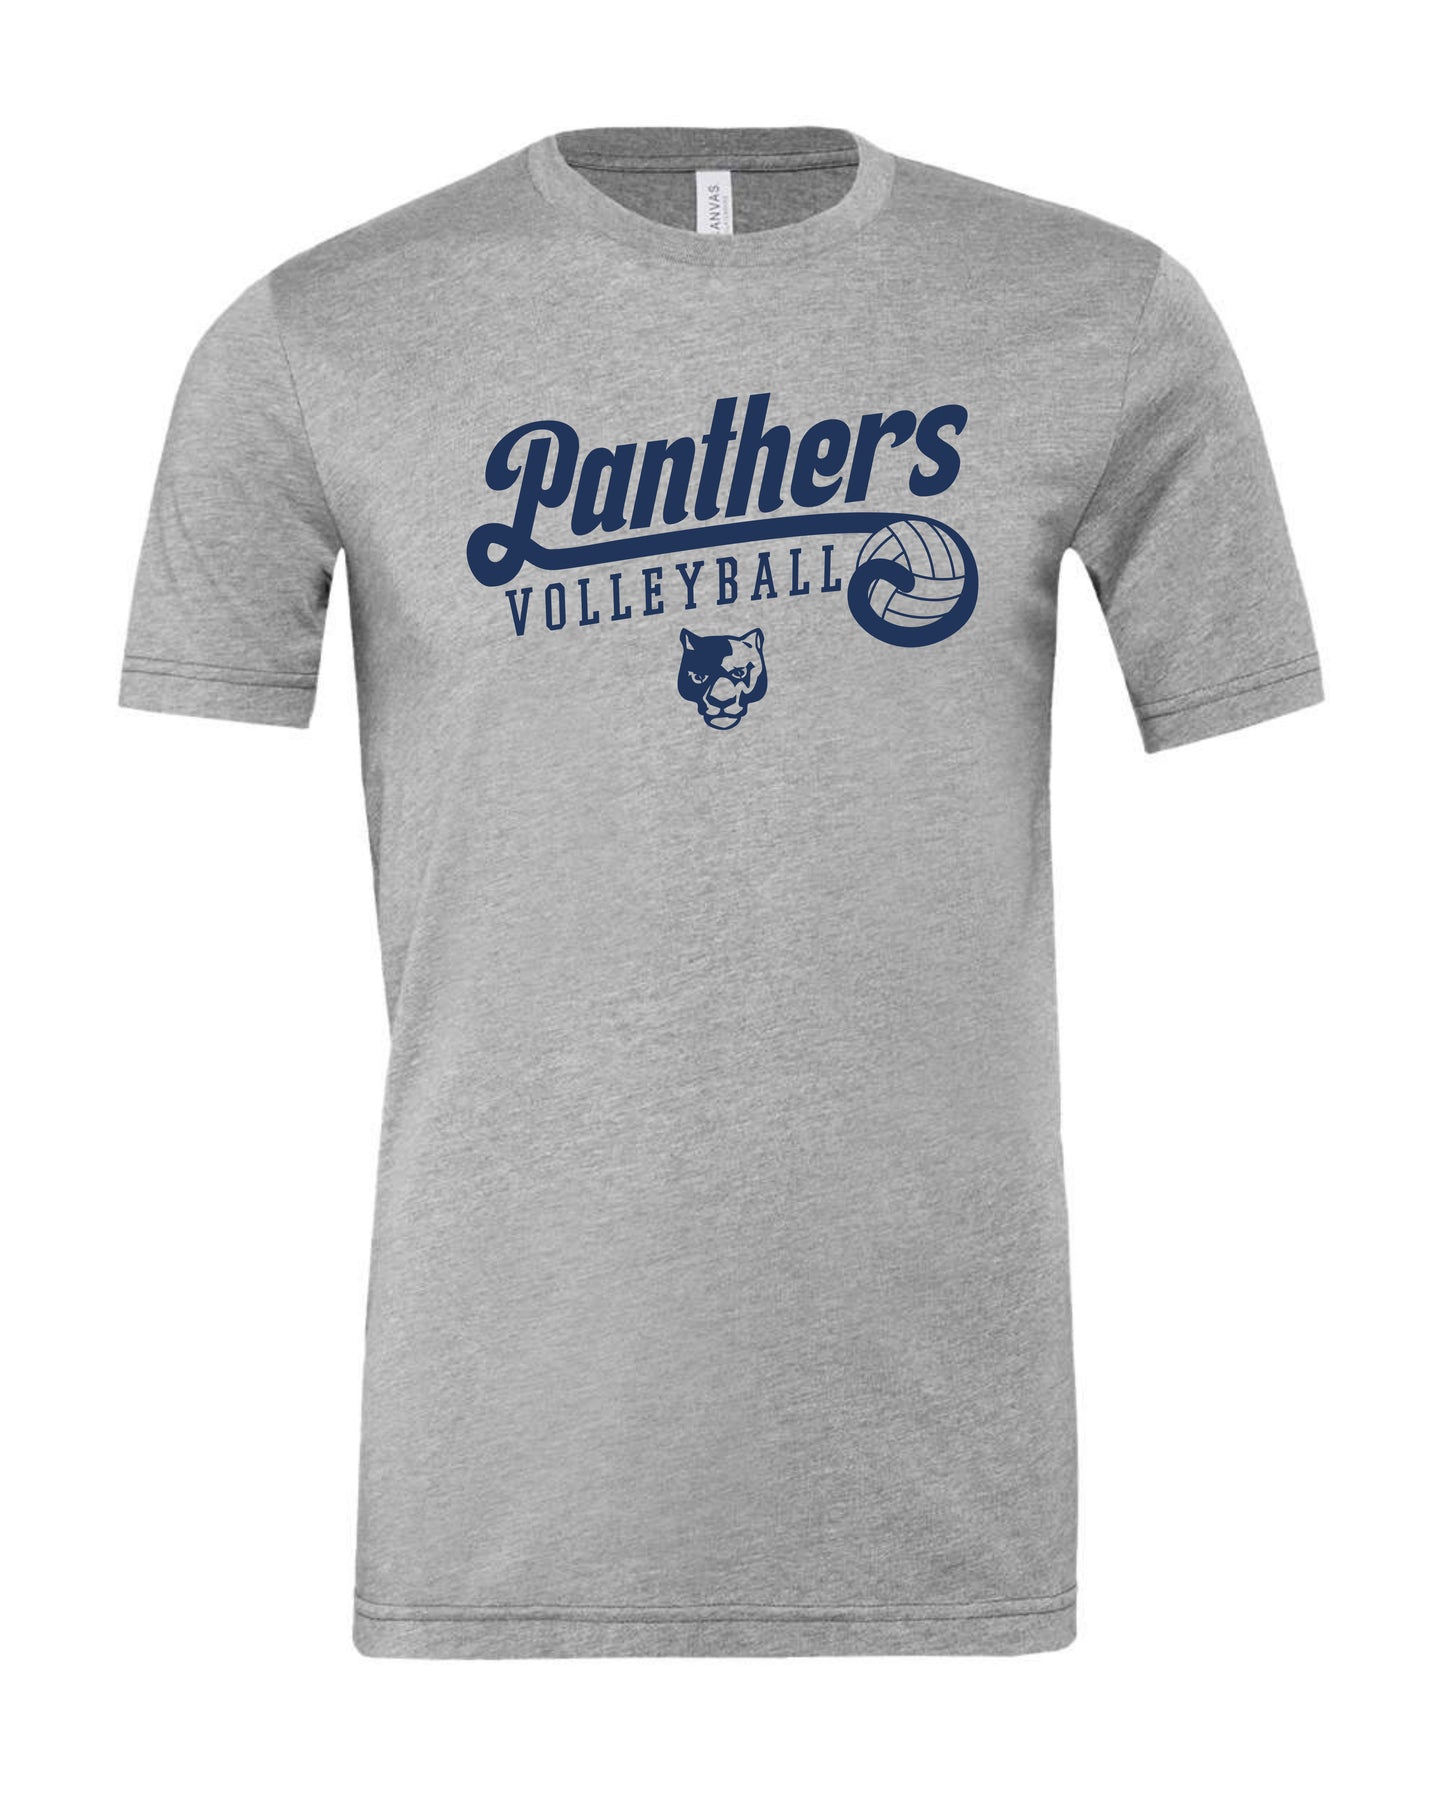 Panthers Volleyball Retro - Adult Tee